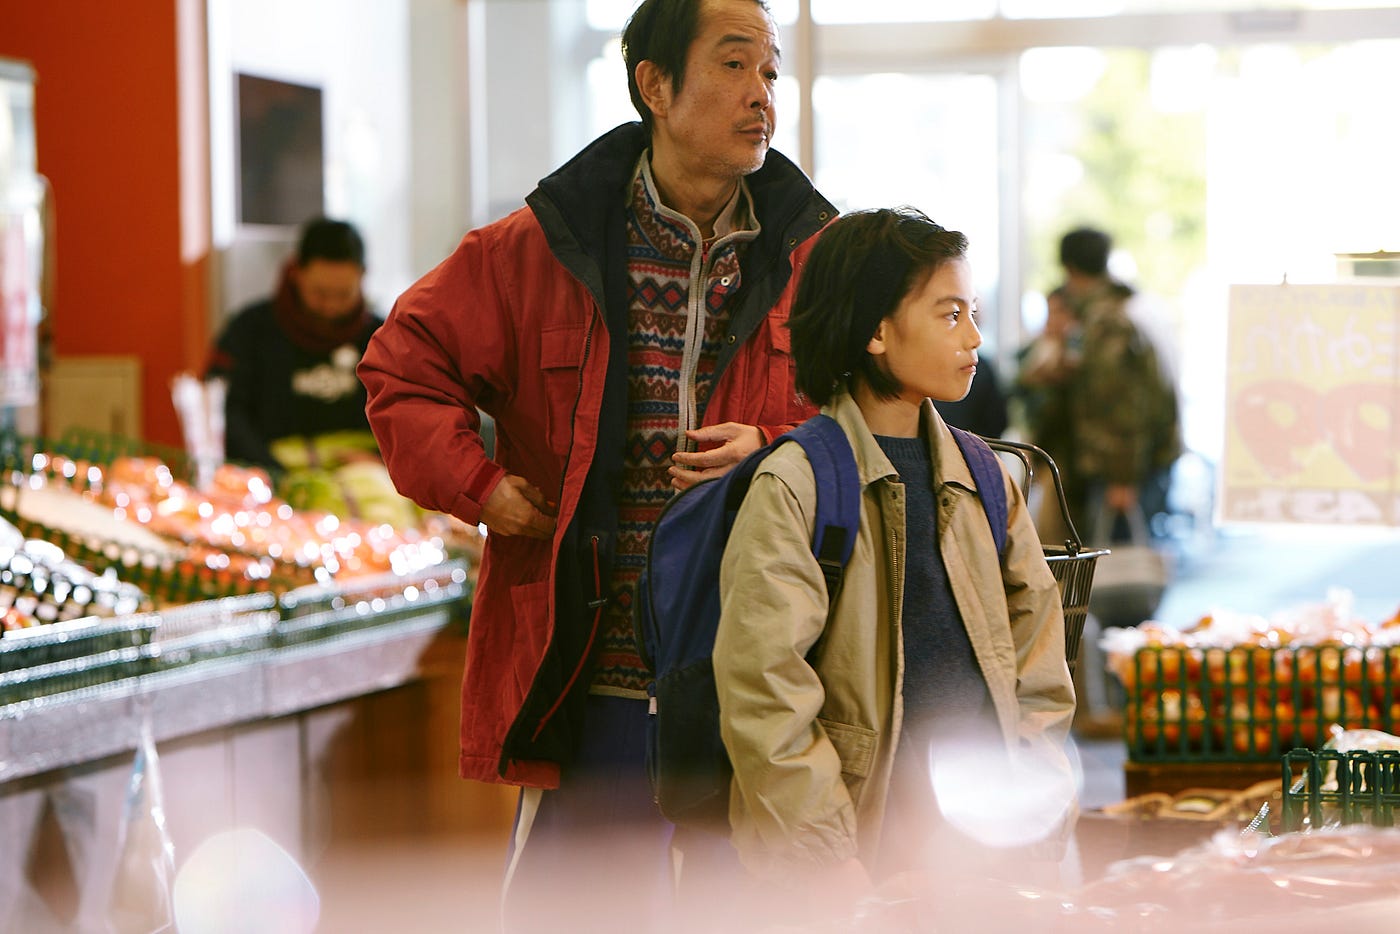 SHOPLIFTERS: Another Stunning Work from Kore-eda | by elizabeth stoddard |  Cinapse